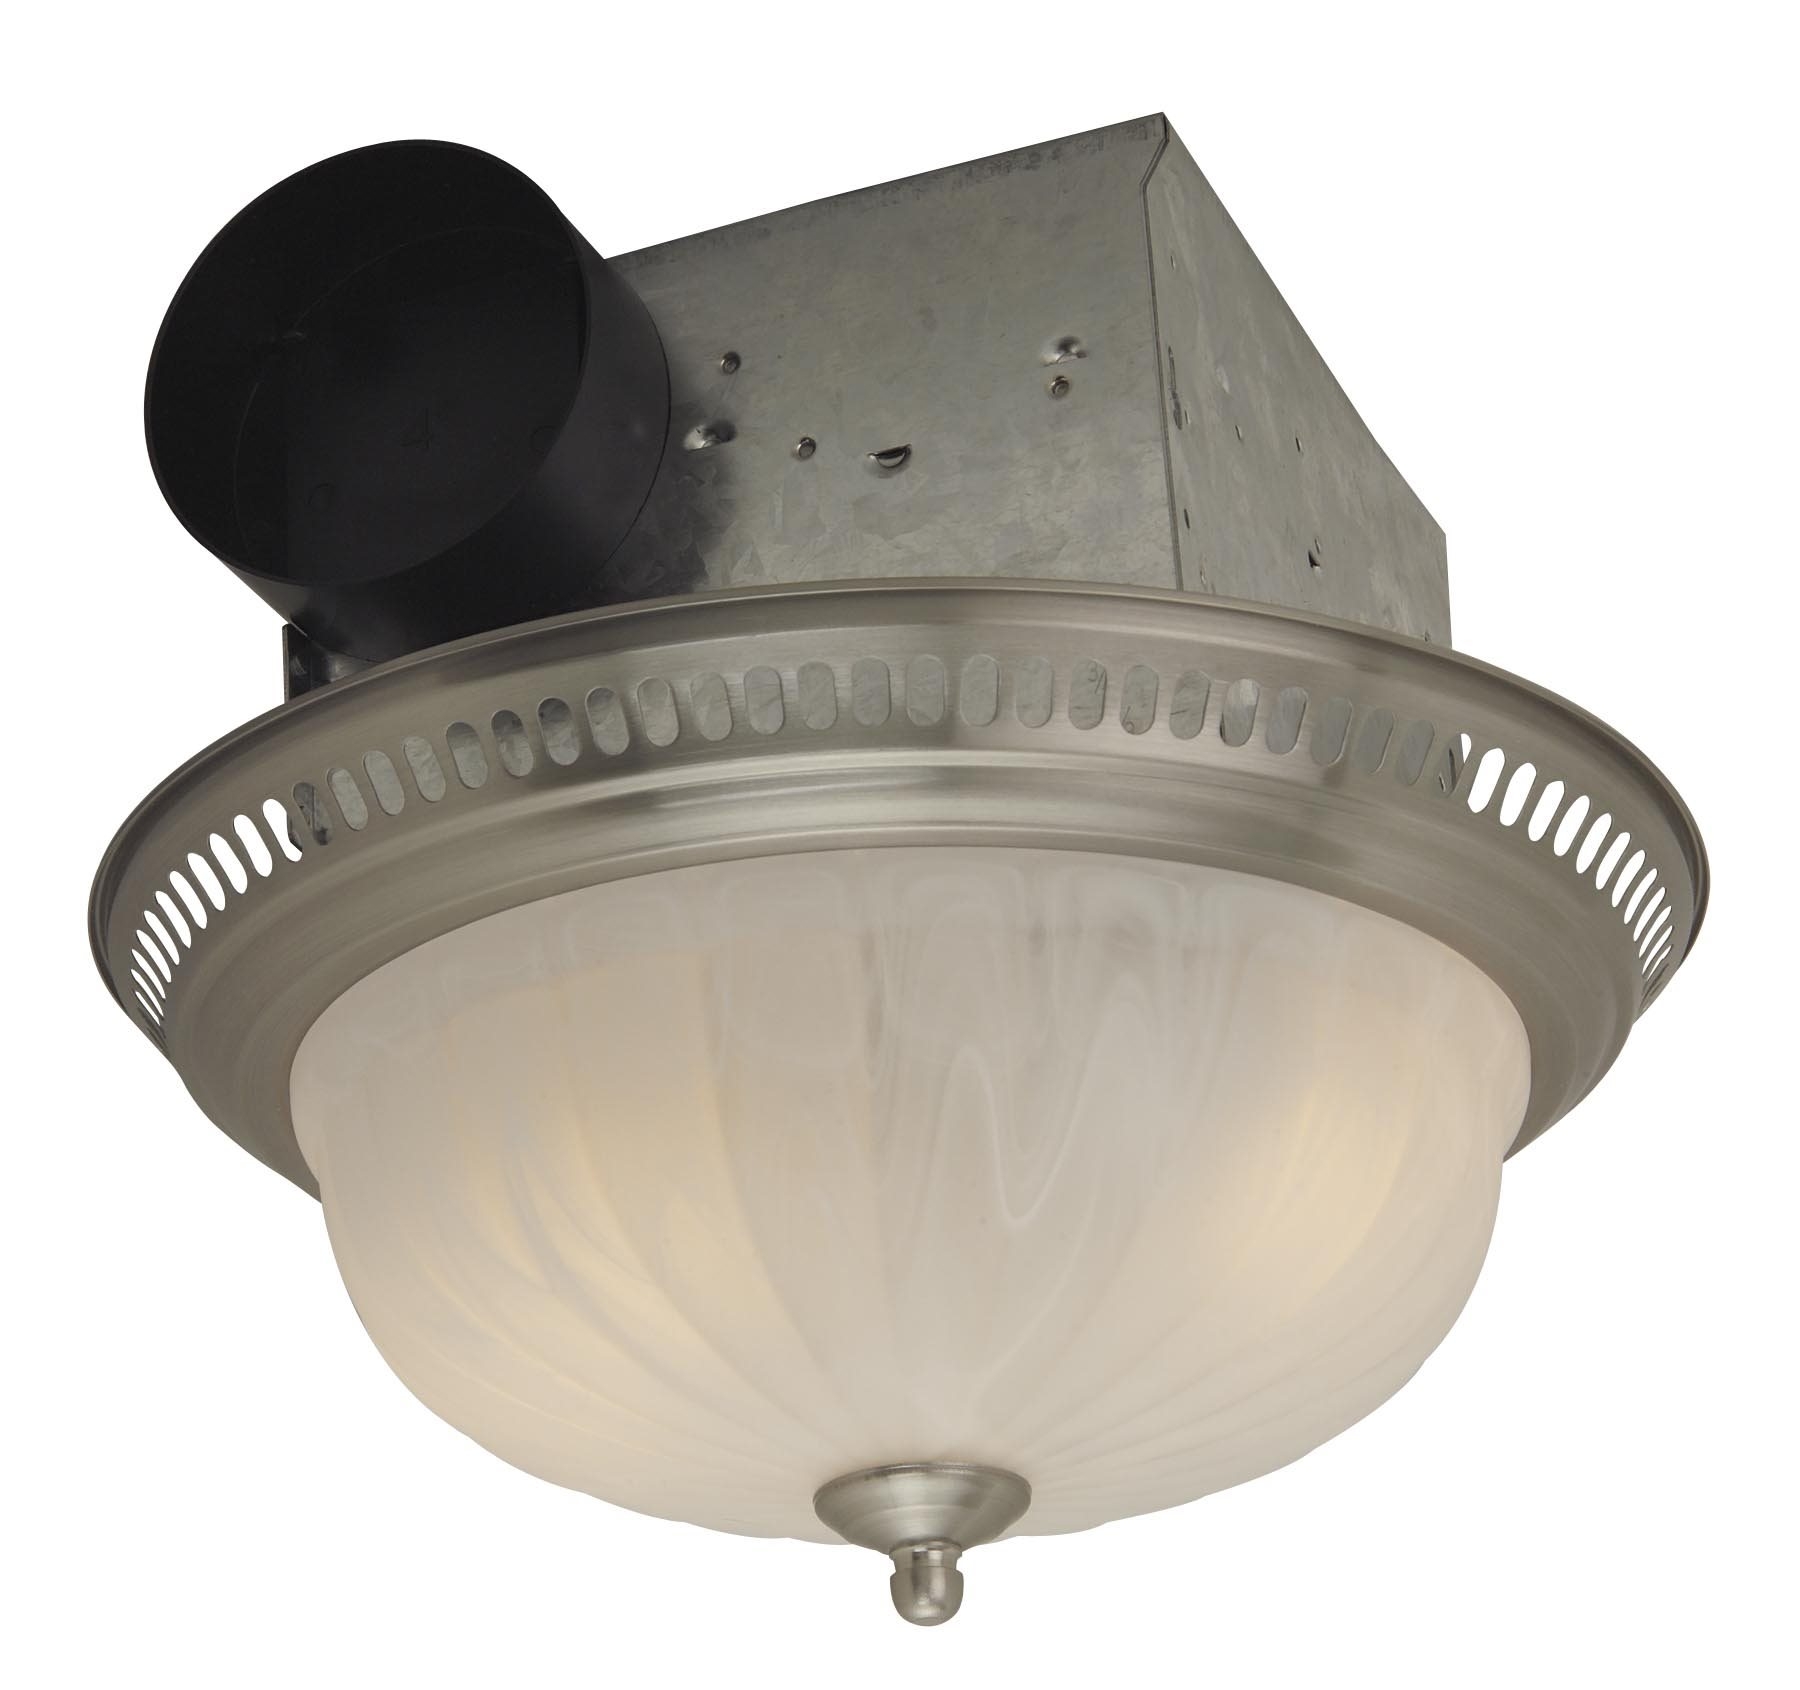 Decorative Designer Bath Fan with Light in Stainless Steel